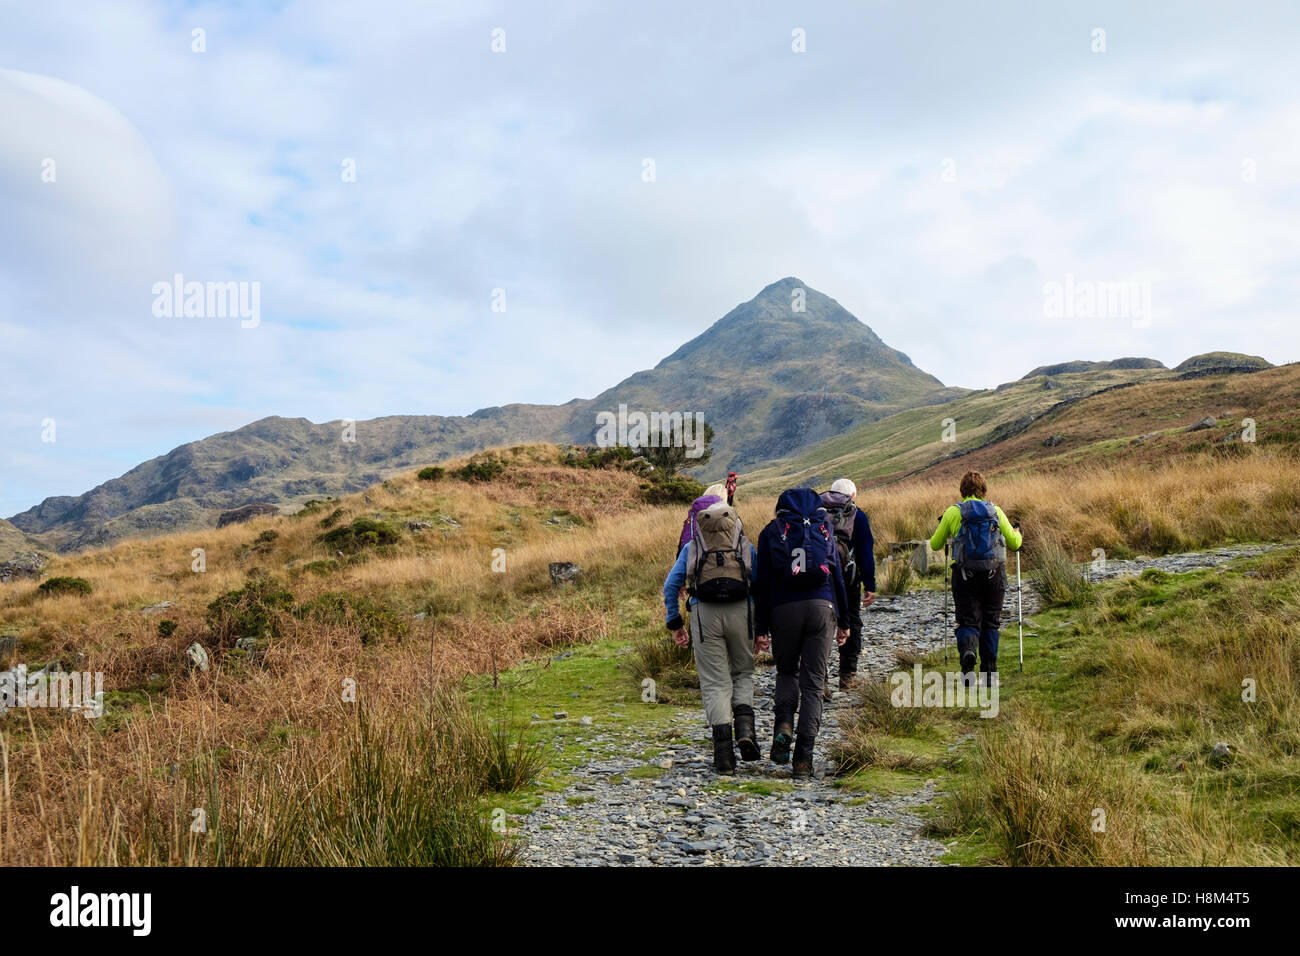 Hikers hiking on a mountain path up Cnicht in mountains of Snowdonia National Park from Croesor, Gwynedd, Wales, UK, Britain Stock Photo